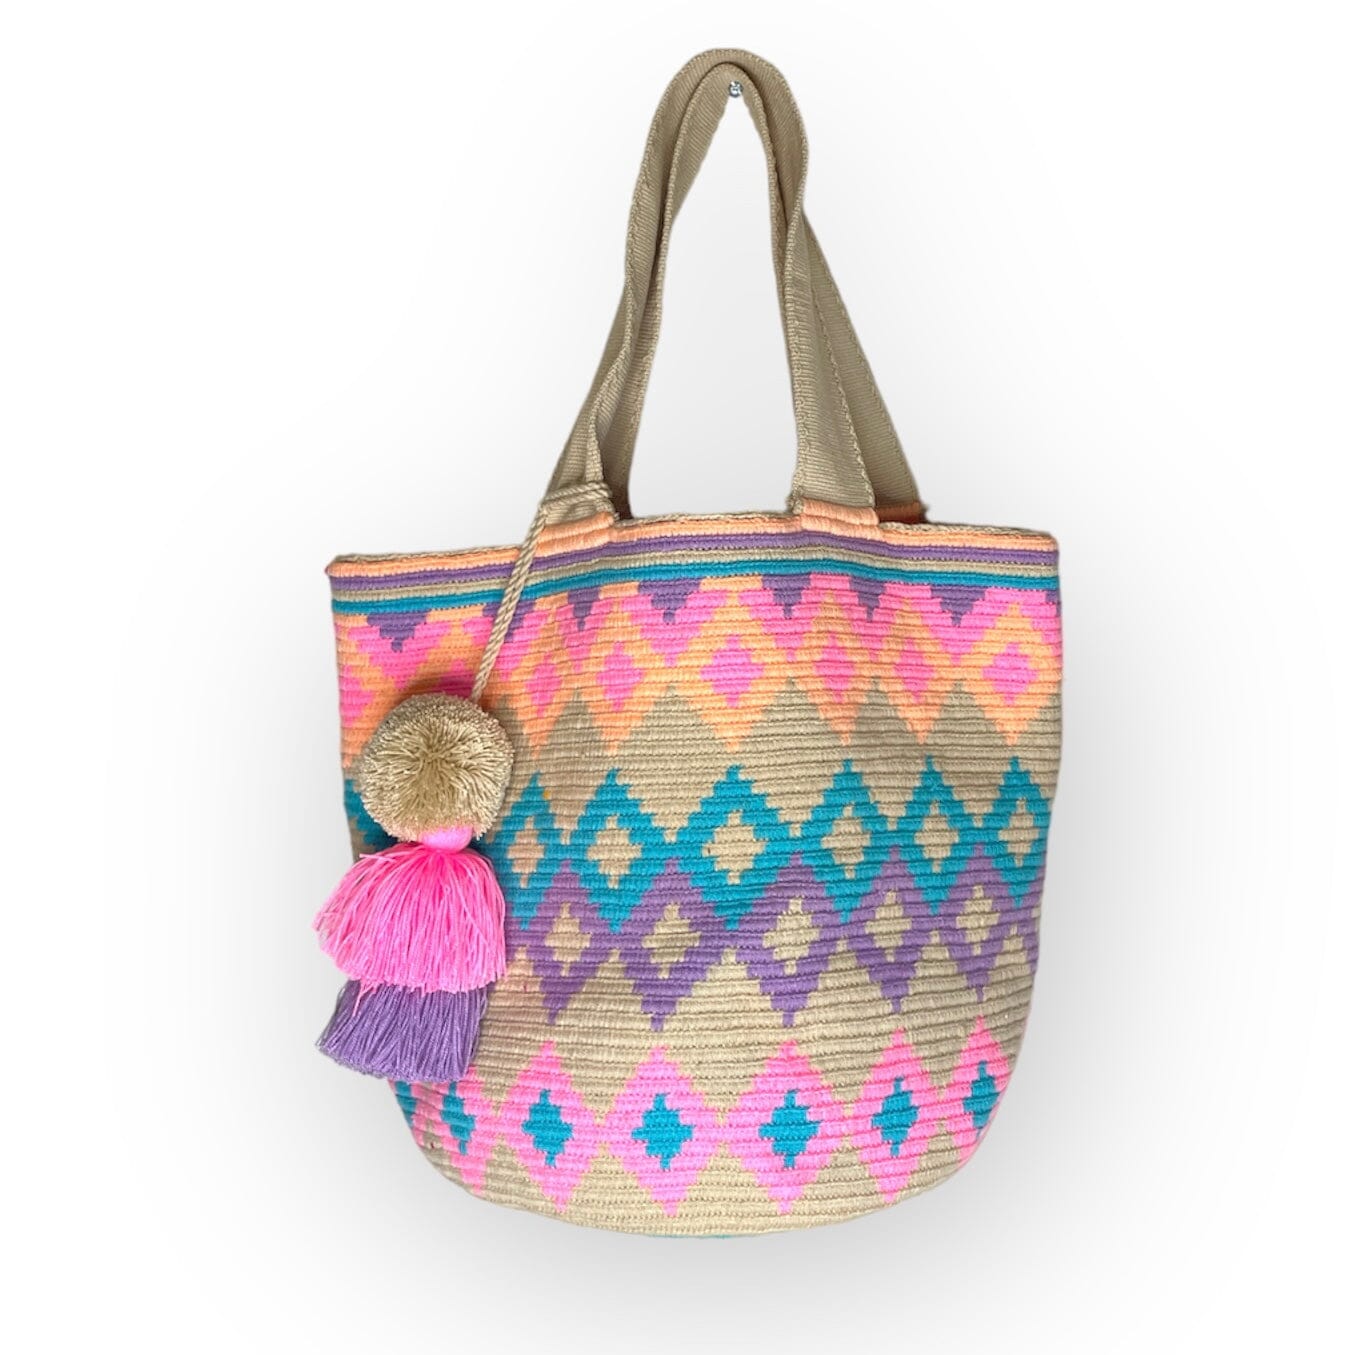 Diamond Cotton Candy Shades | Large Crochet Summer Tote Bag | Best Beach Tote Bags for women | Colorful 4U